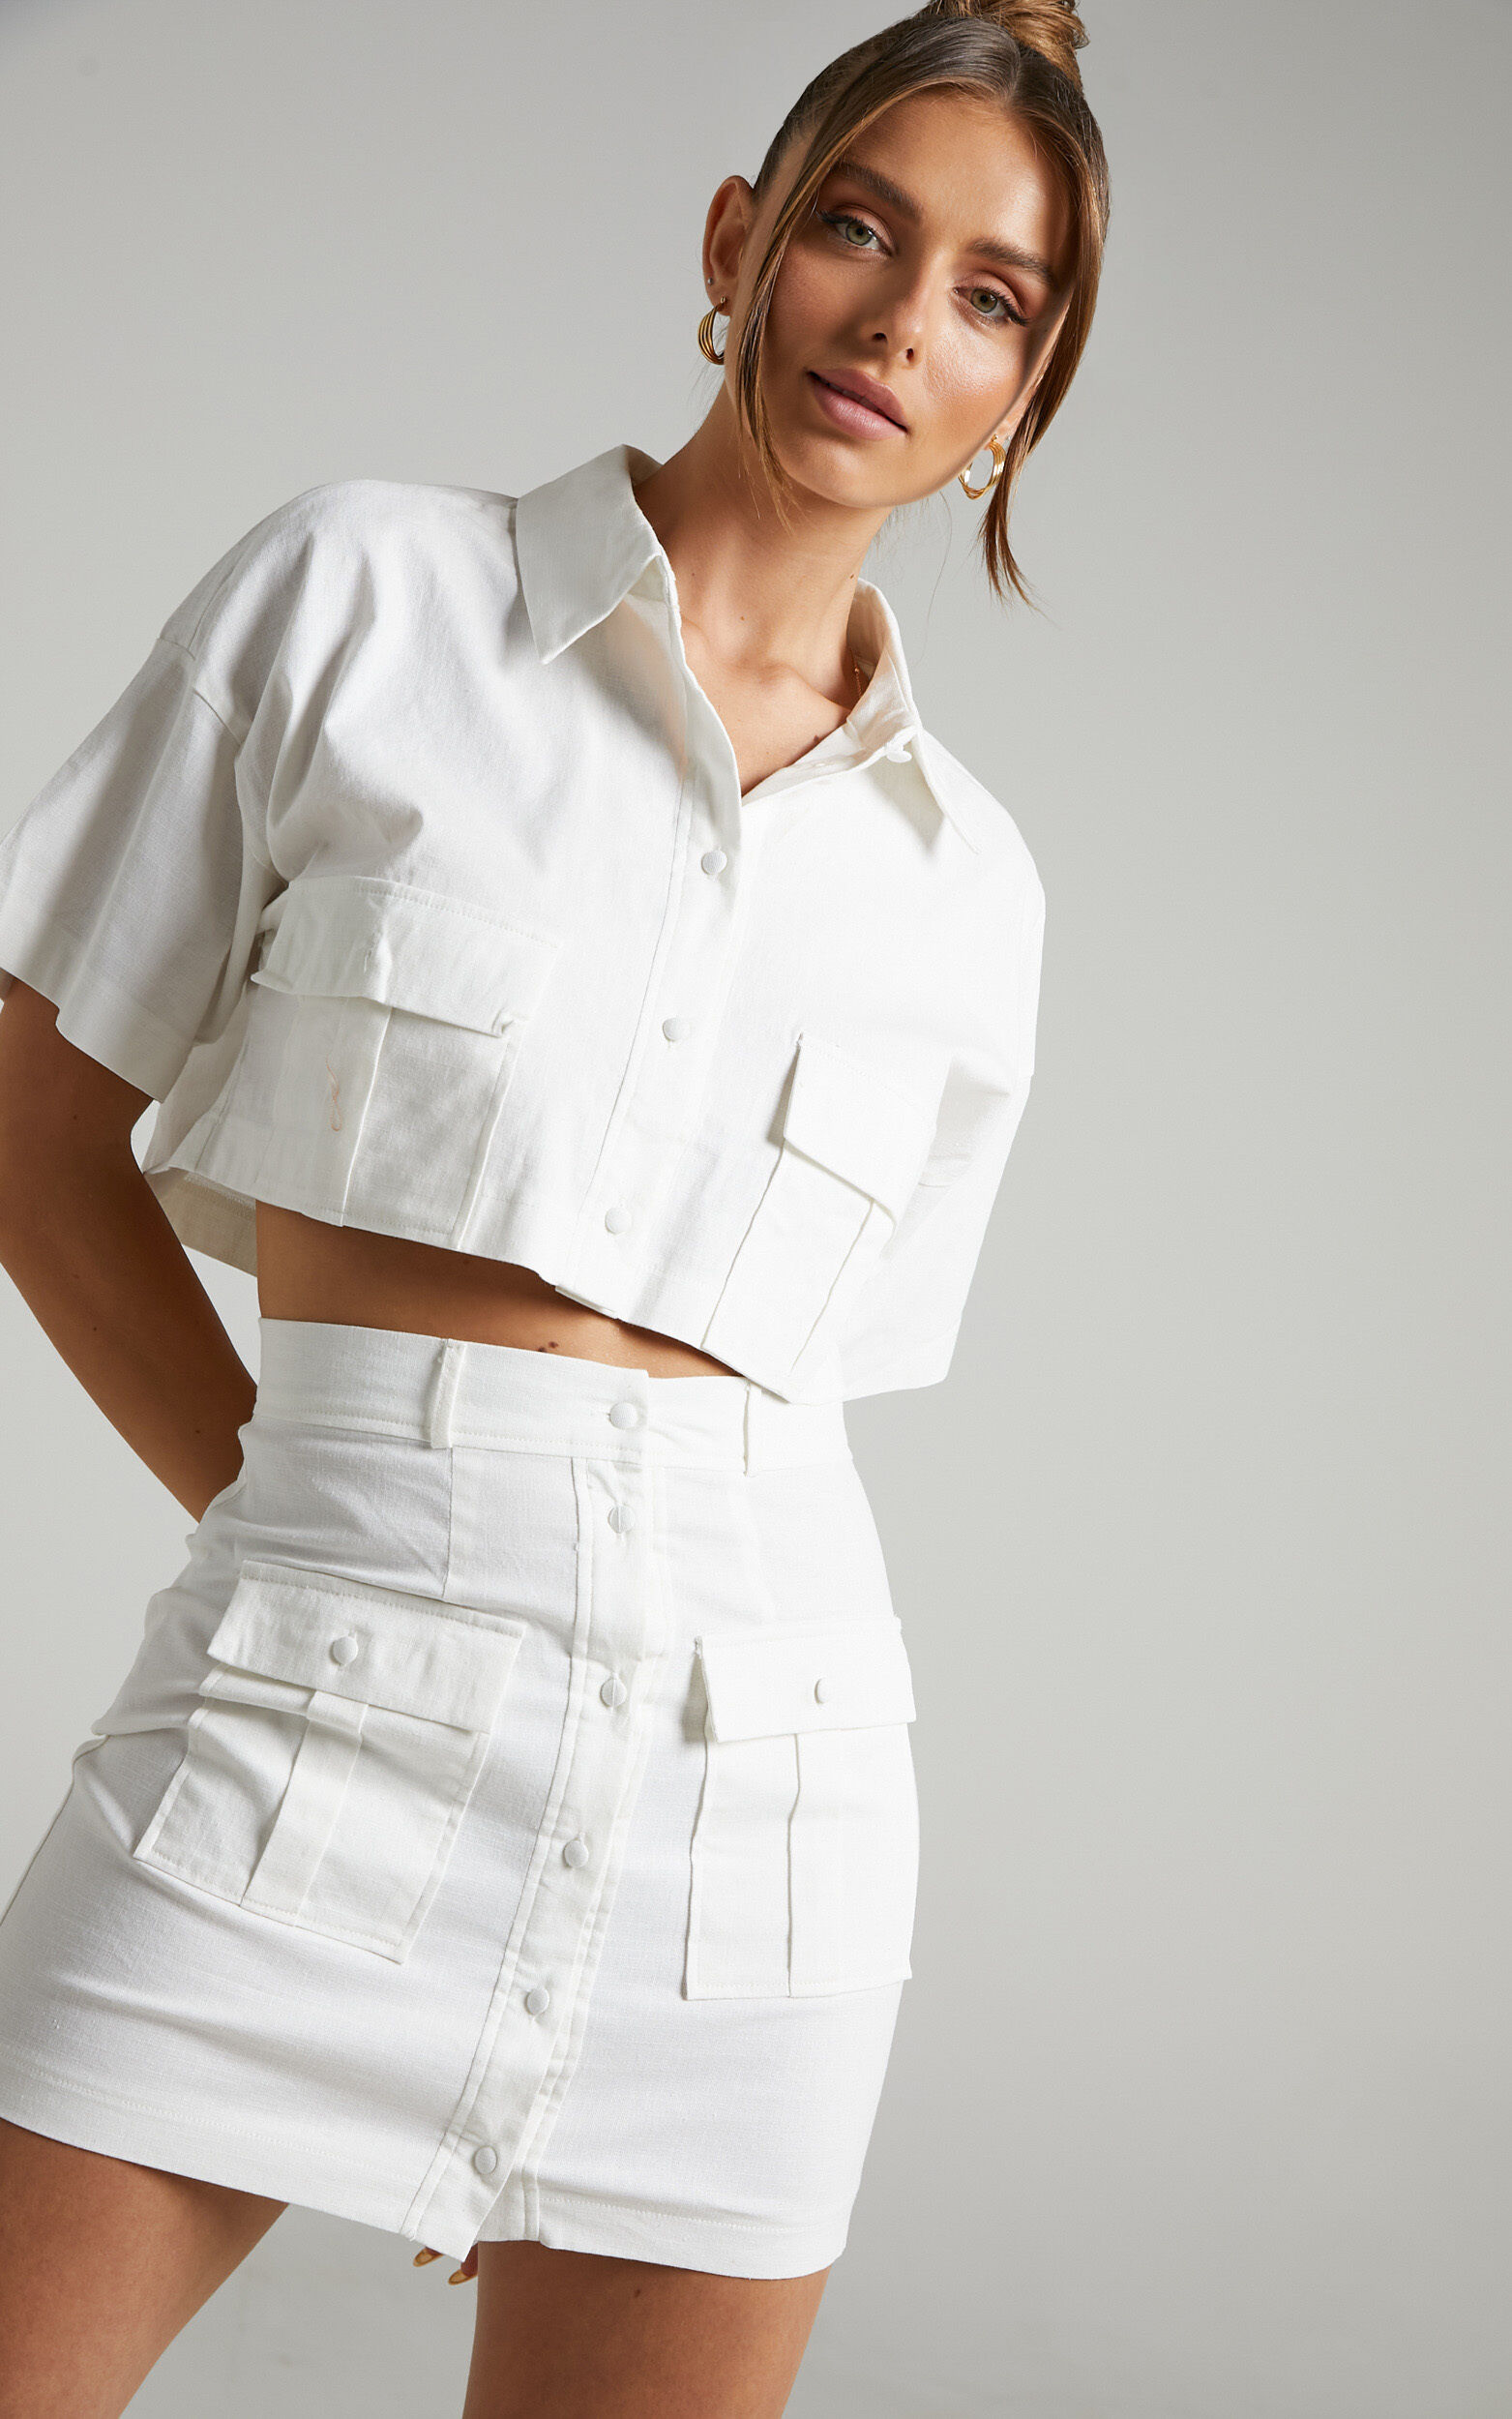 Navine Button Front Crop Top and Cargo Pocket Mini Skirt Two Piece Set in White - 04, WHT2, super-hi-res image number null